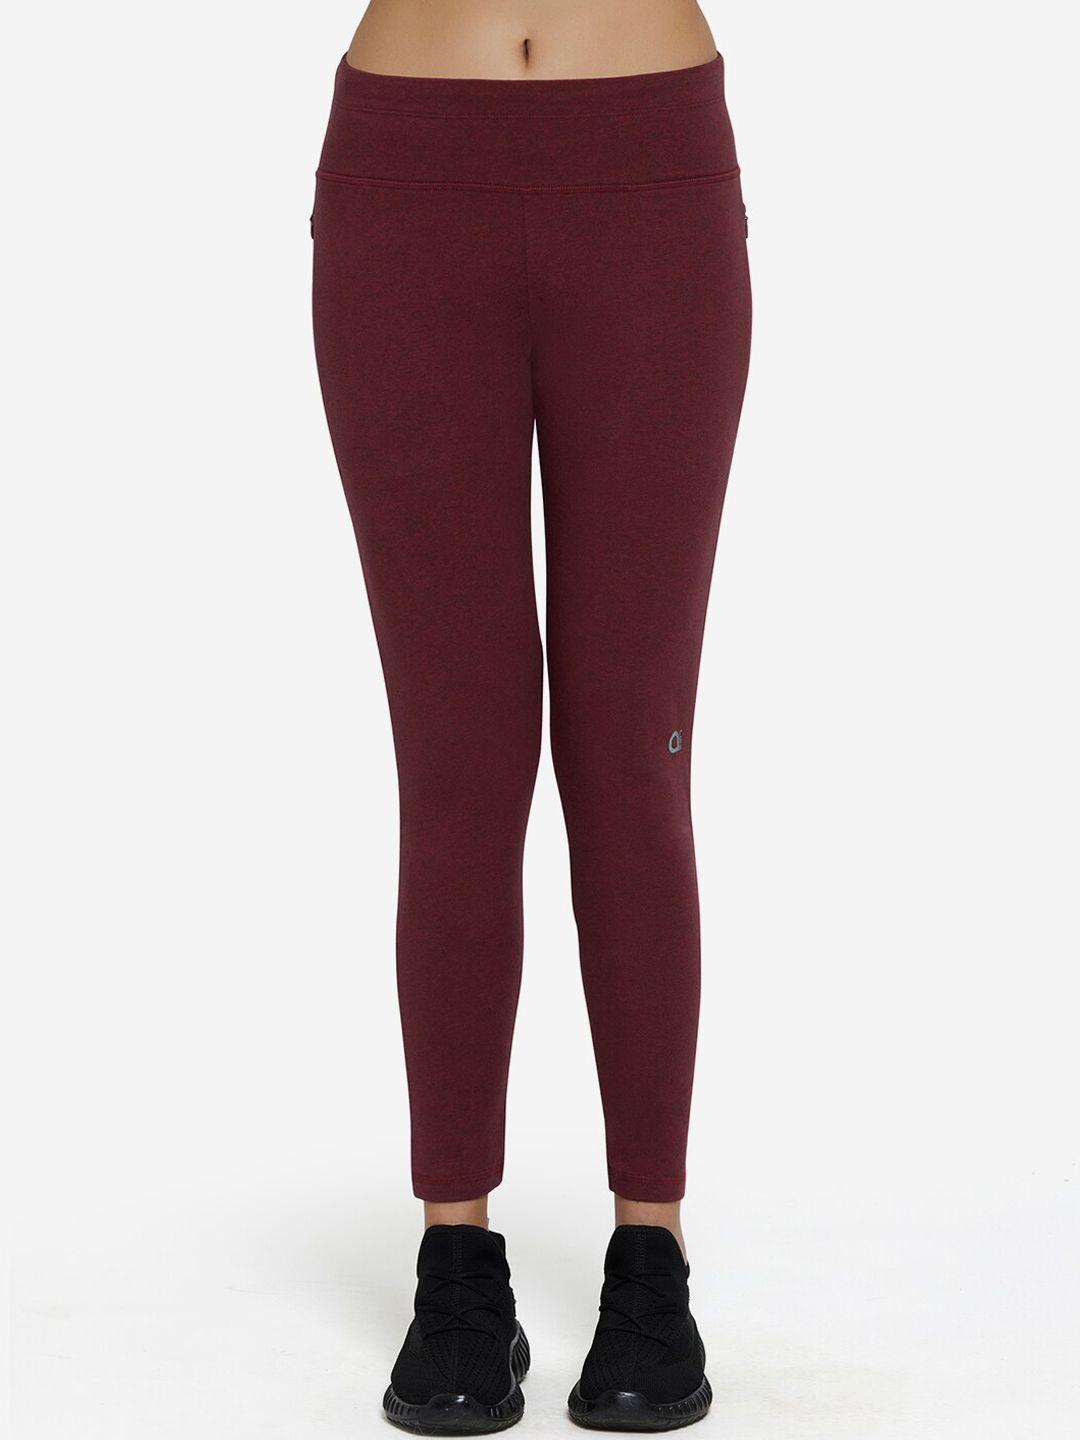 amante-women-maroon-solid-mid-rise-tights